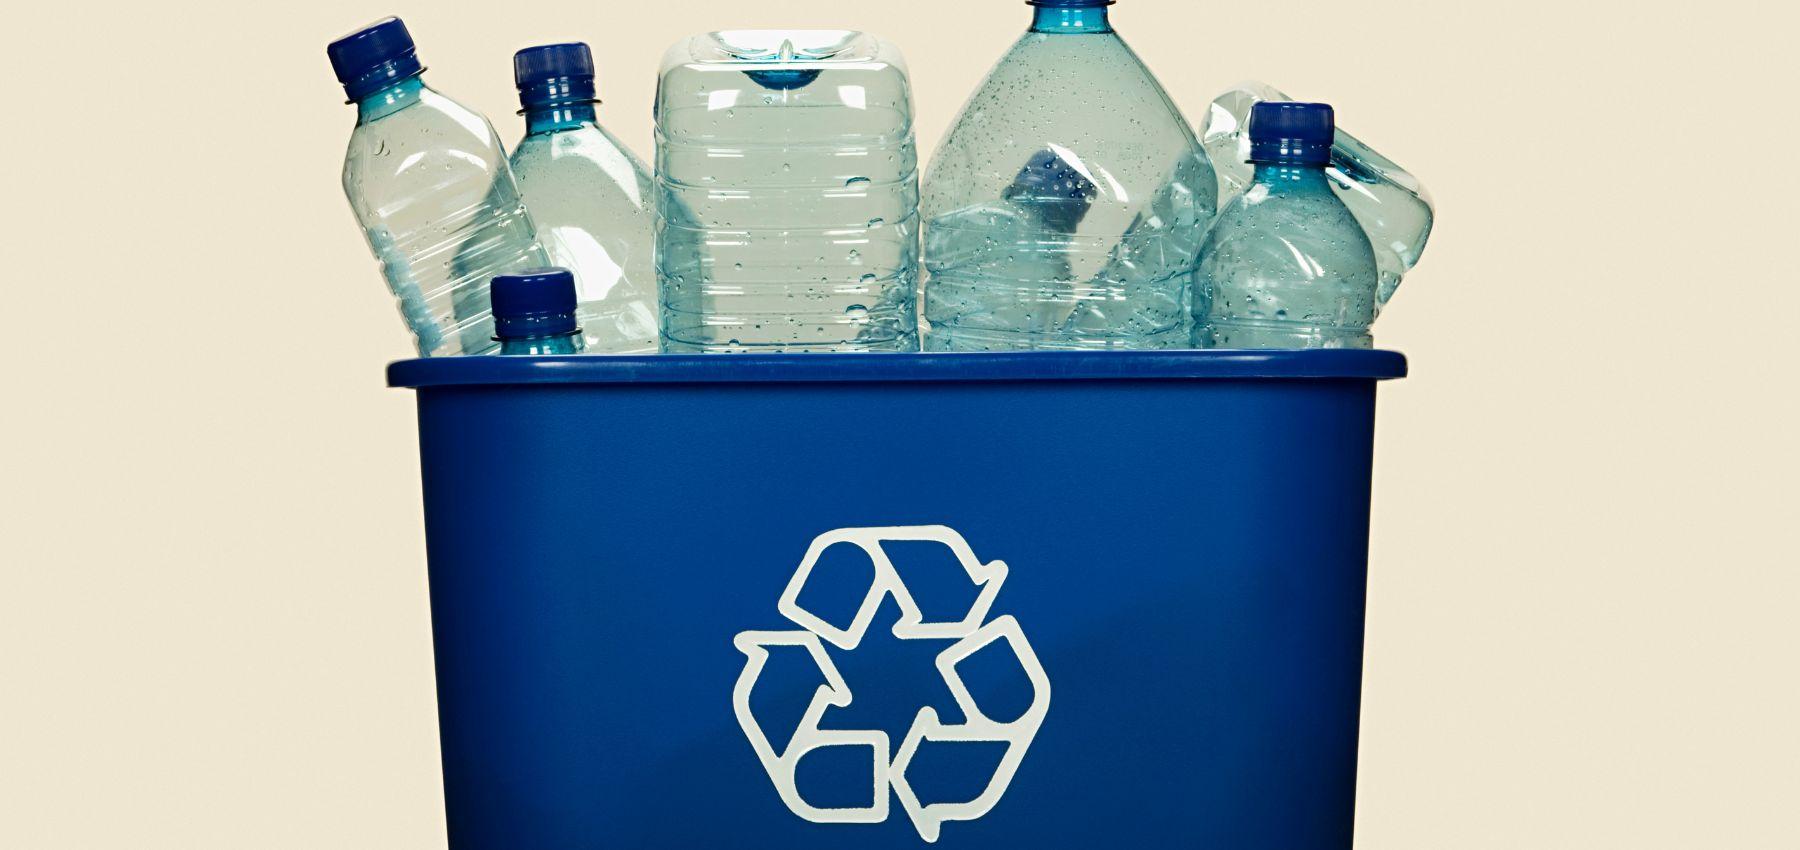 Empty plastic drink bottles sit in a blue recycling bin with recycling triangle symbol on the front